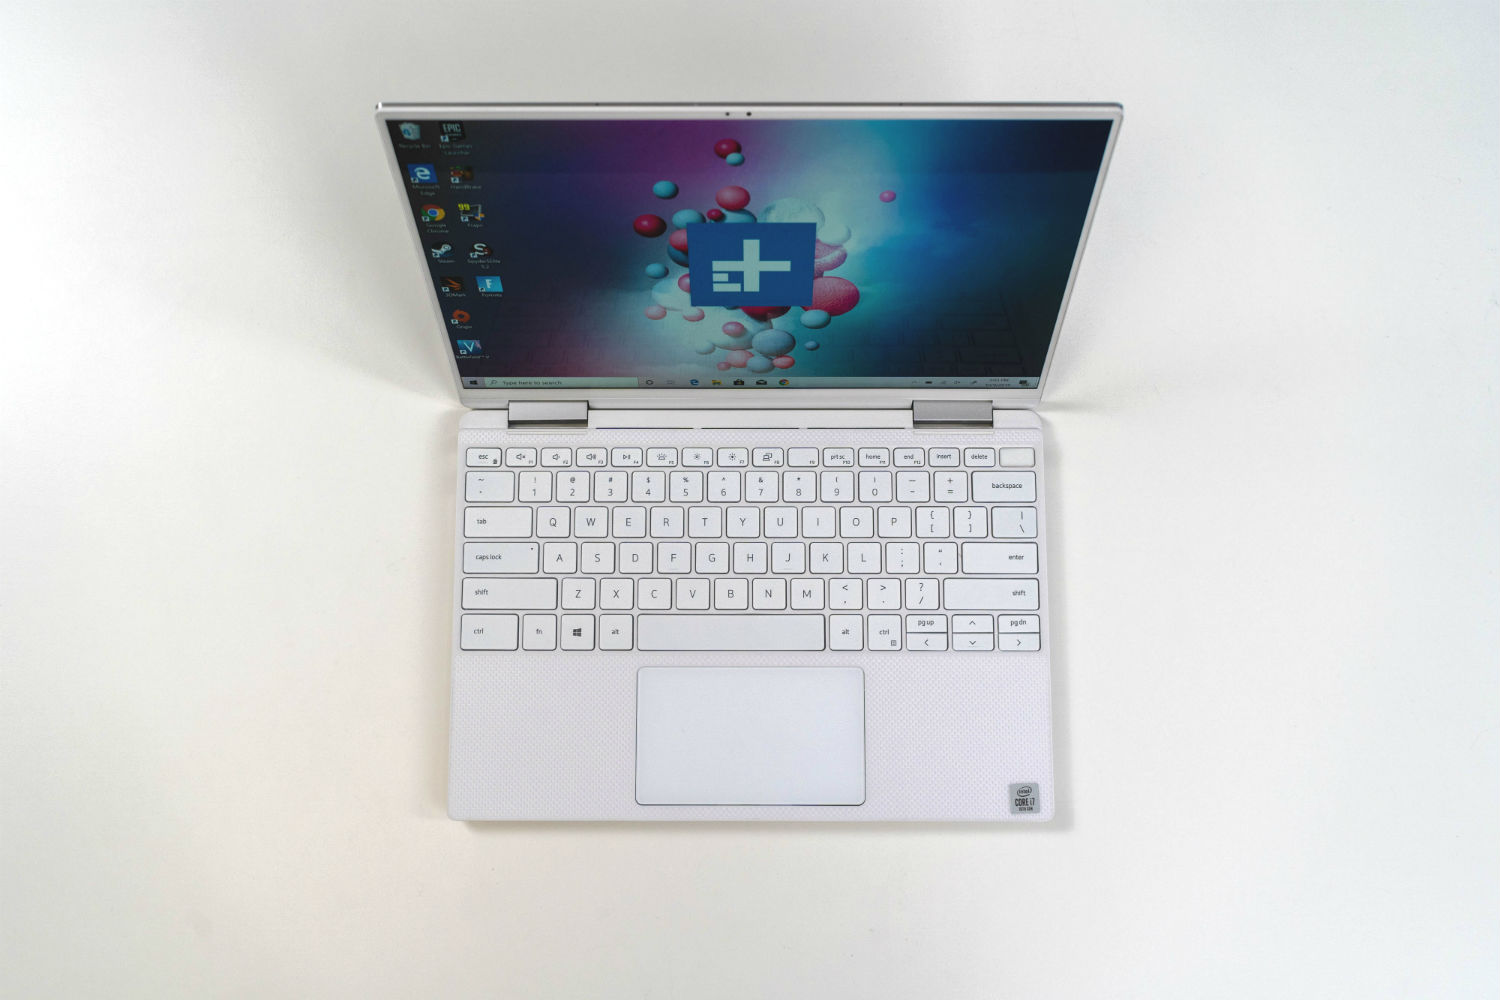 Dell XPS 13 2-in-1 7390 Review (2019): The Next Era For XPS | Digital Trends